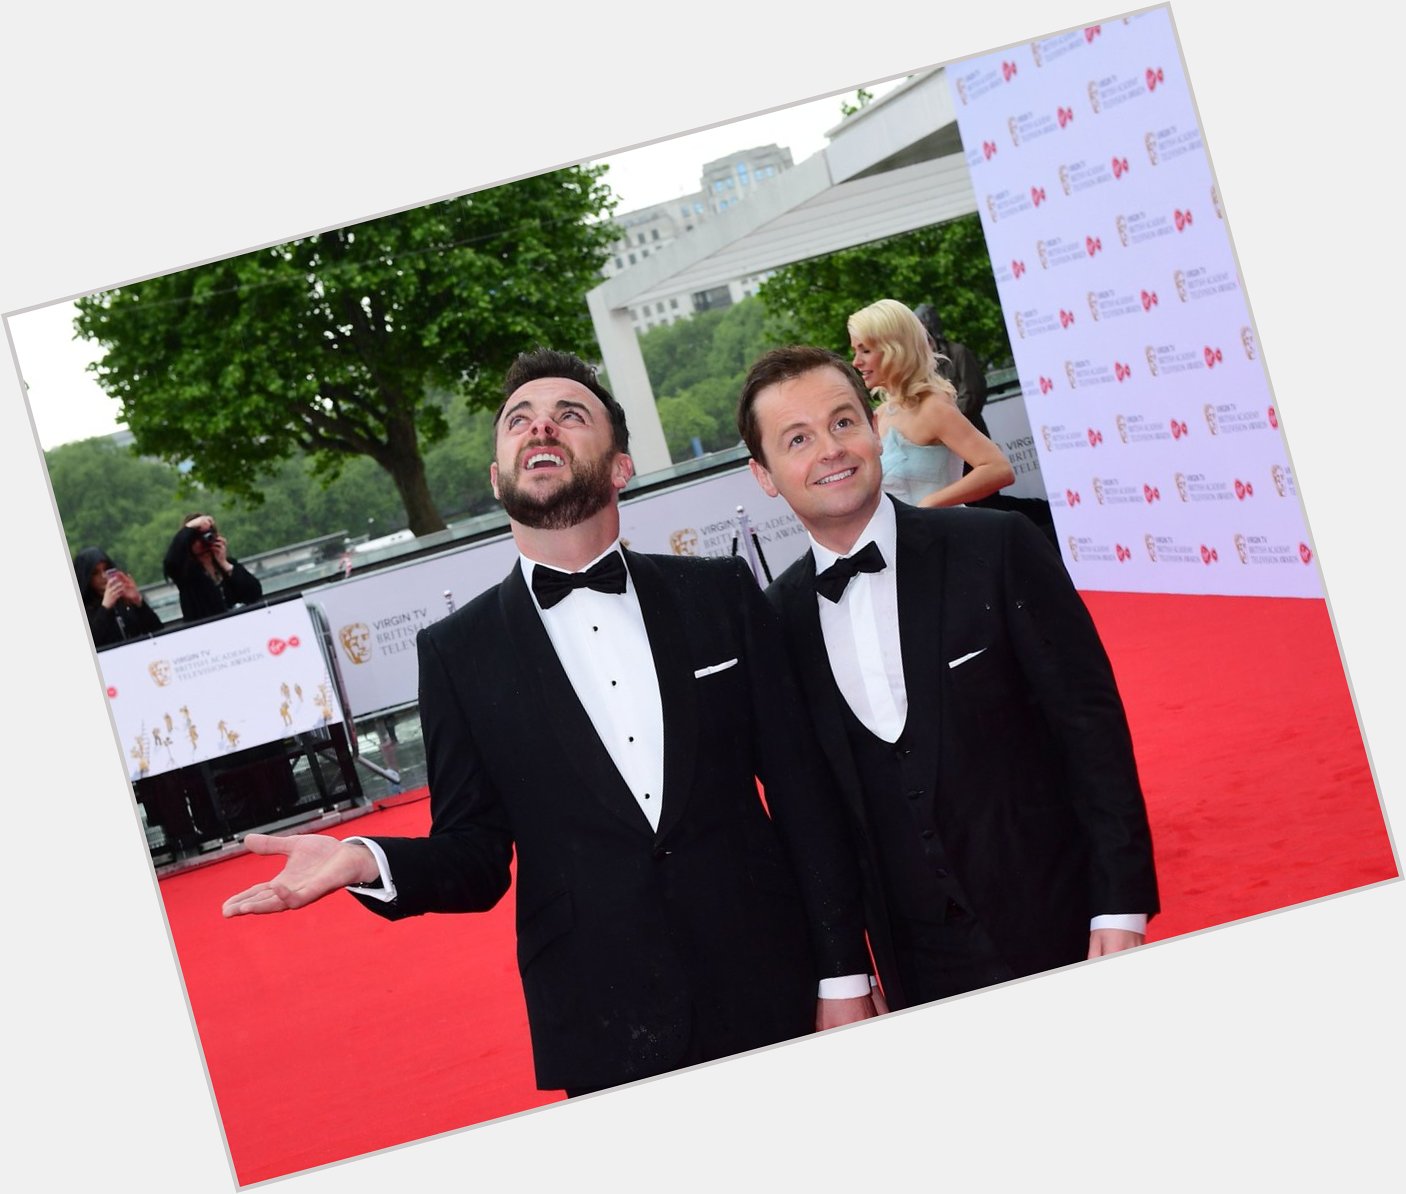 Ant McPartlin wishes Declan Donnelly happy birthday with lighthearted message  